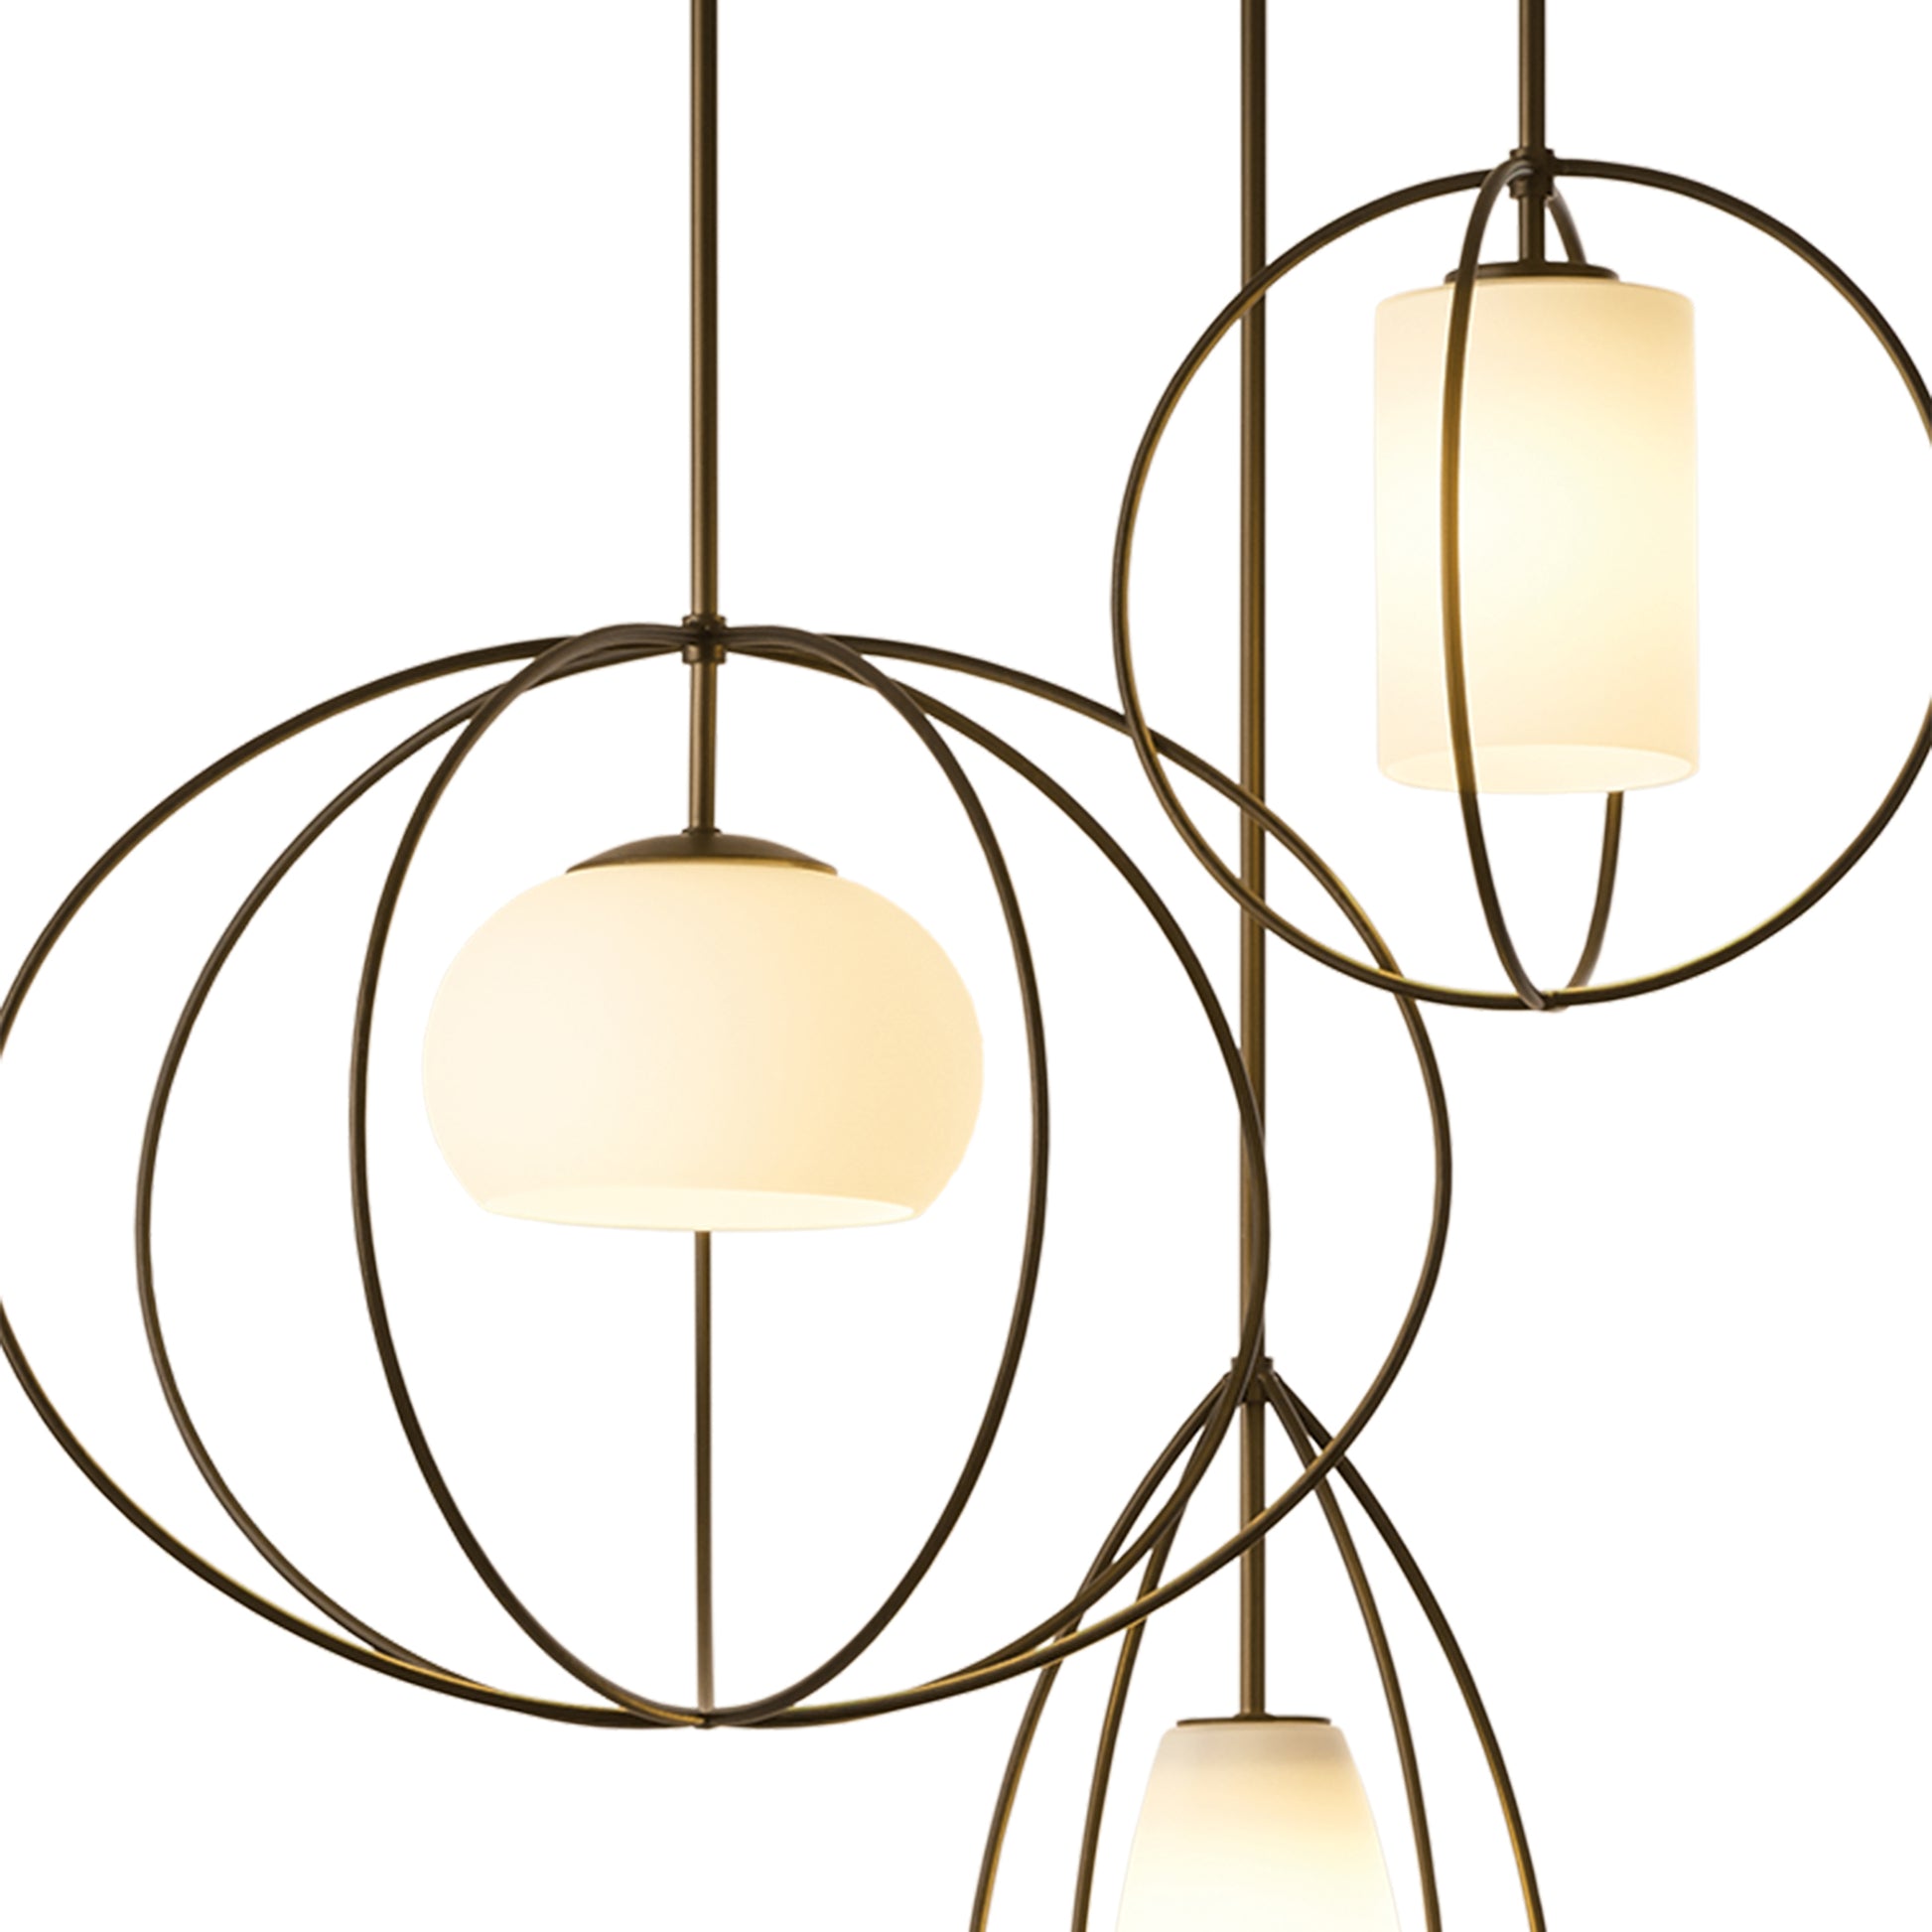 Three Hubbardton Forge Treble Pendant lighting fixtures hanging from a ceiling.